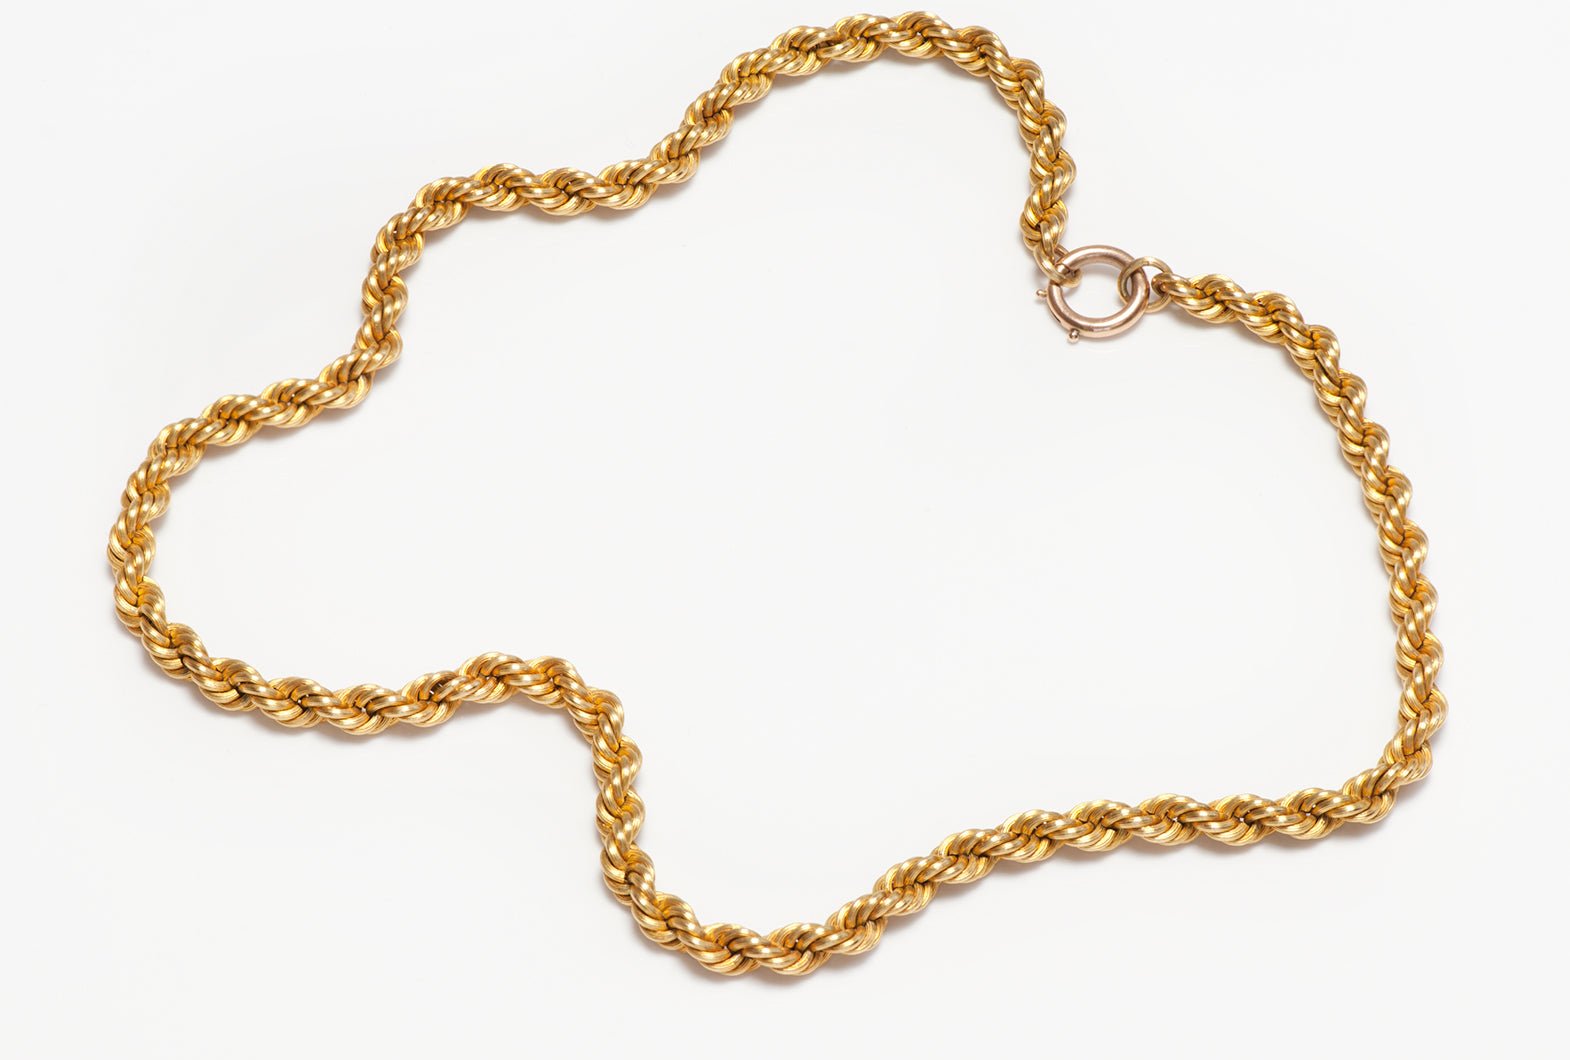 Antique Victorian 15K Yellow Gold Twisted Rope Chain Necklace